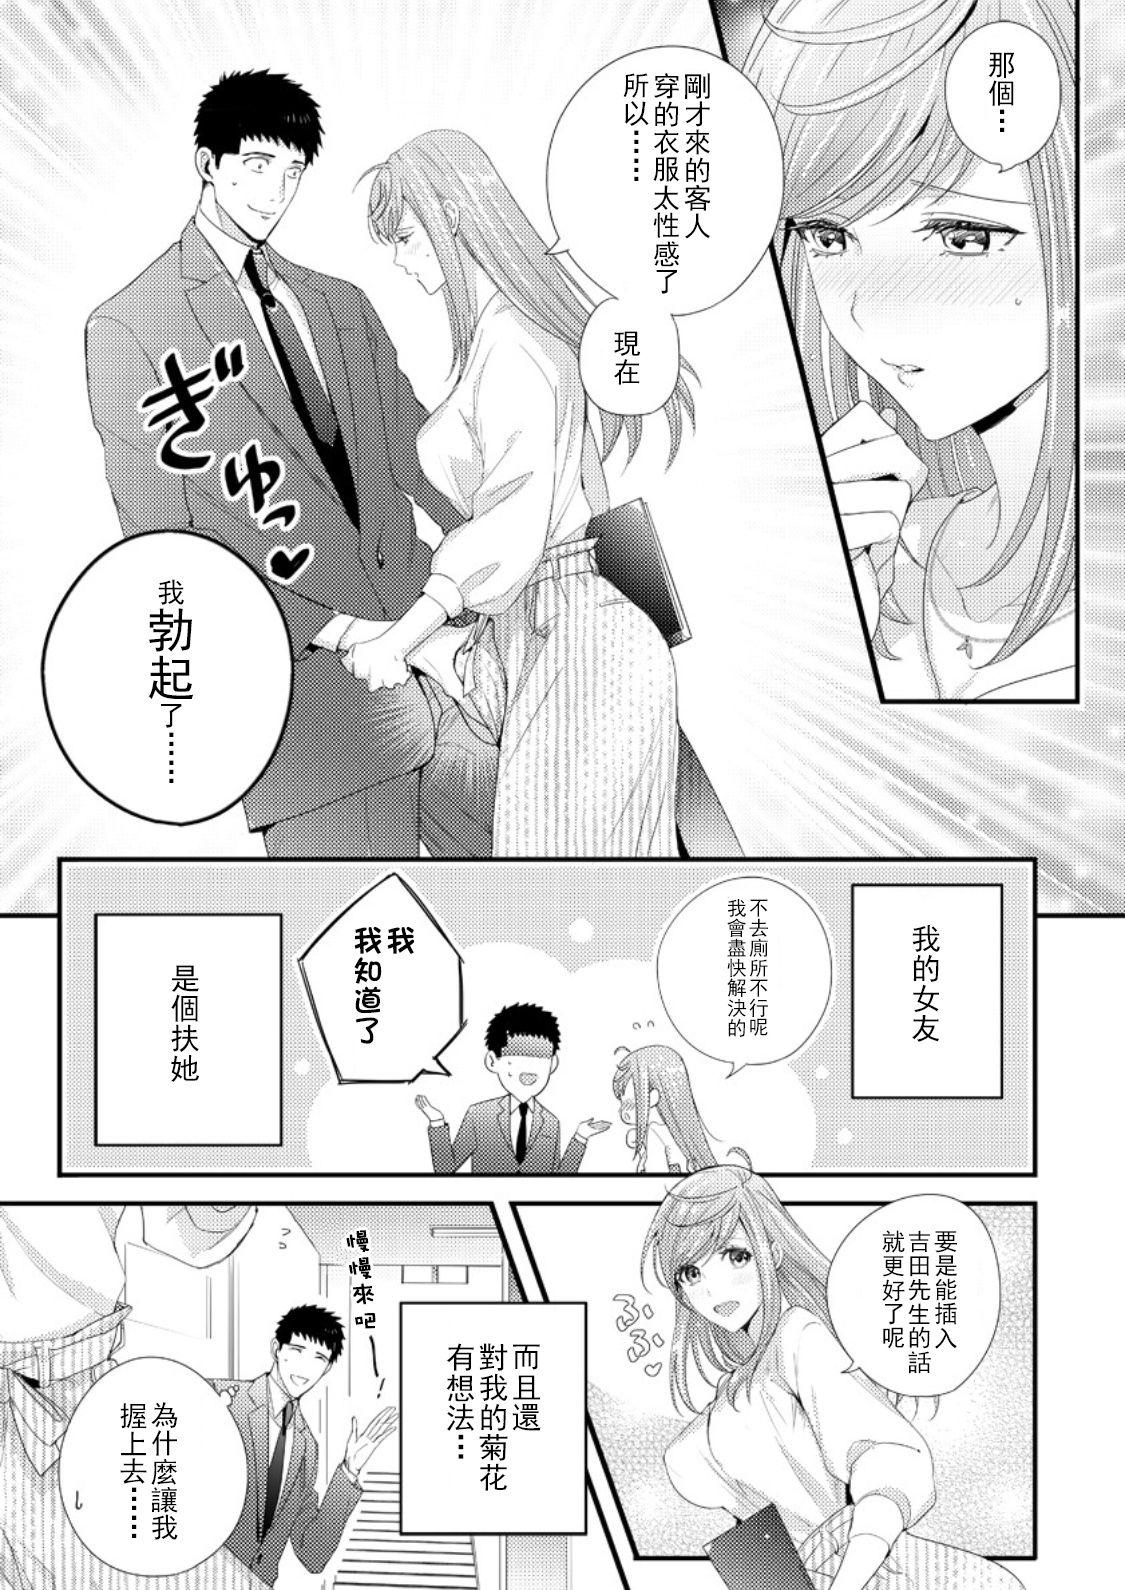 Please Let Me Hold You Futaba-San! Ch.1 2